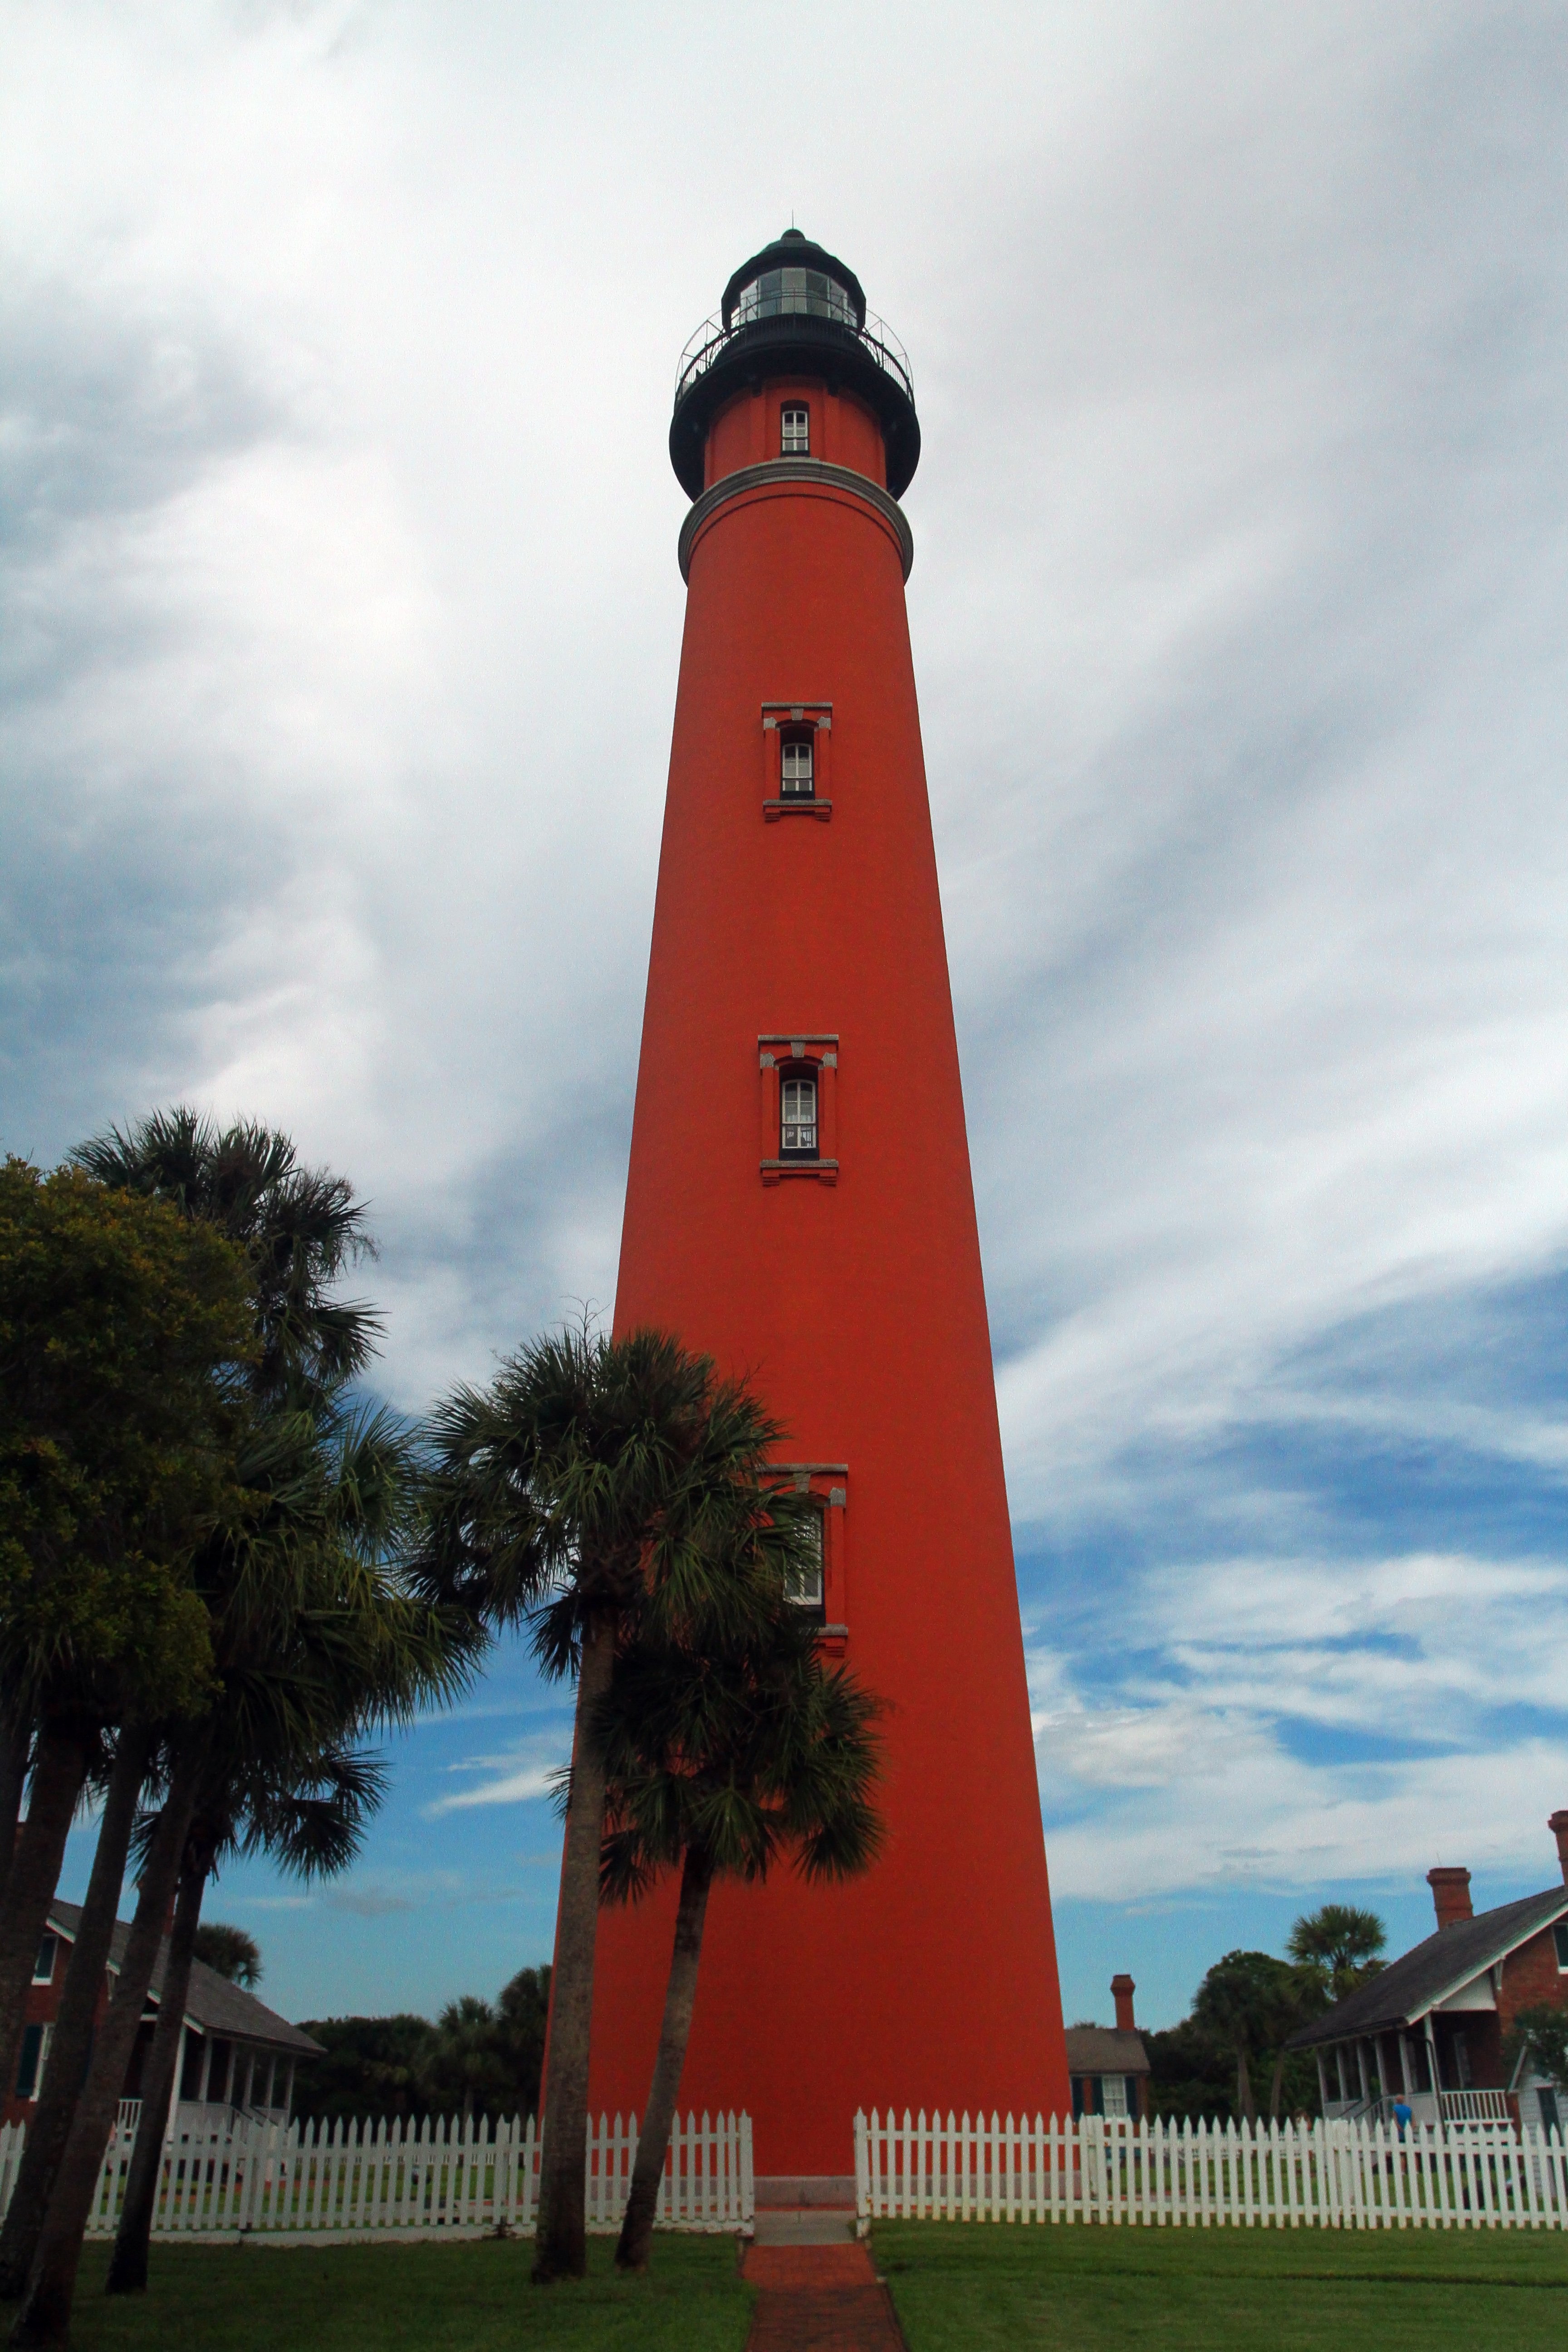 Florida's tallest lighthouse at Ponce de Leon Inlet (Credit: Bill Rockwell)